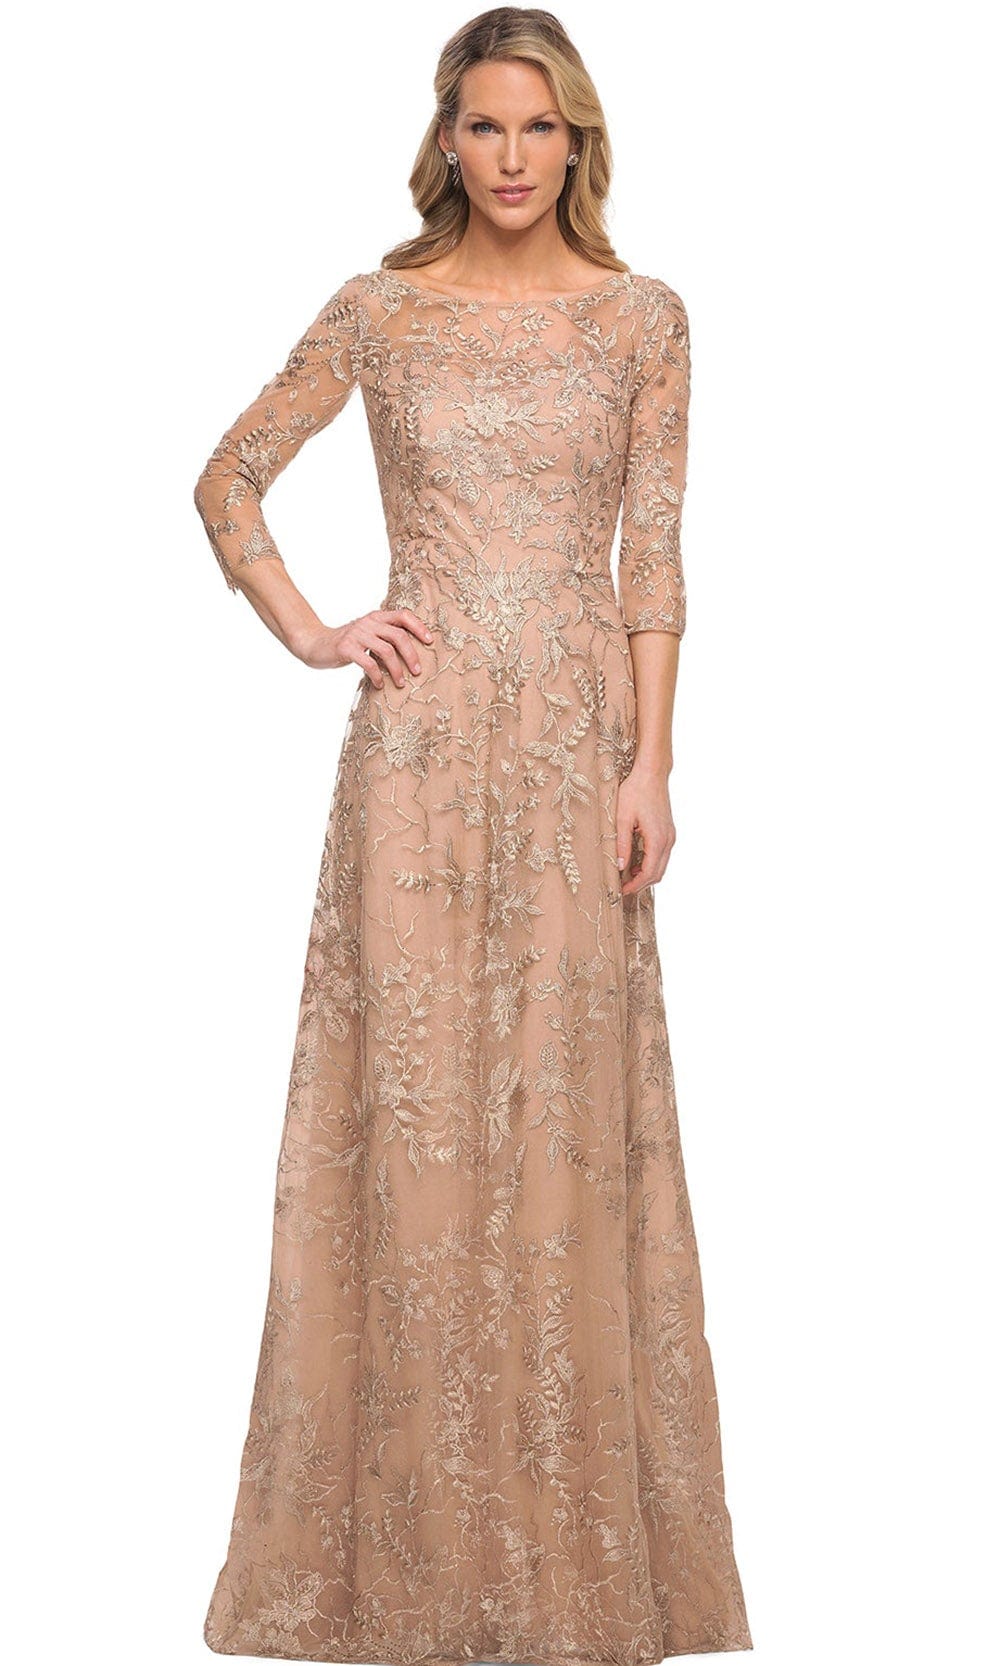 La Femme 30021 - Embroidered Sheer Lace Sheath Dress Special Occasion Dress 4 / Light Gold